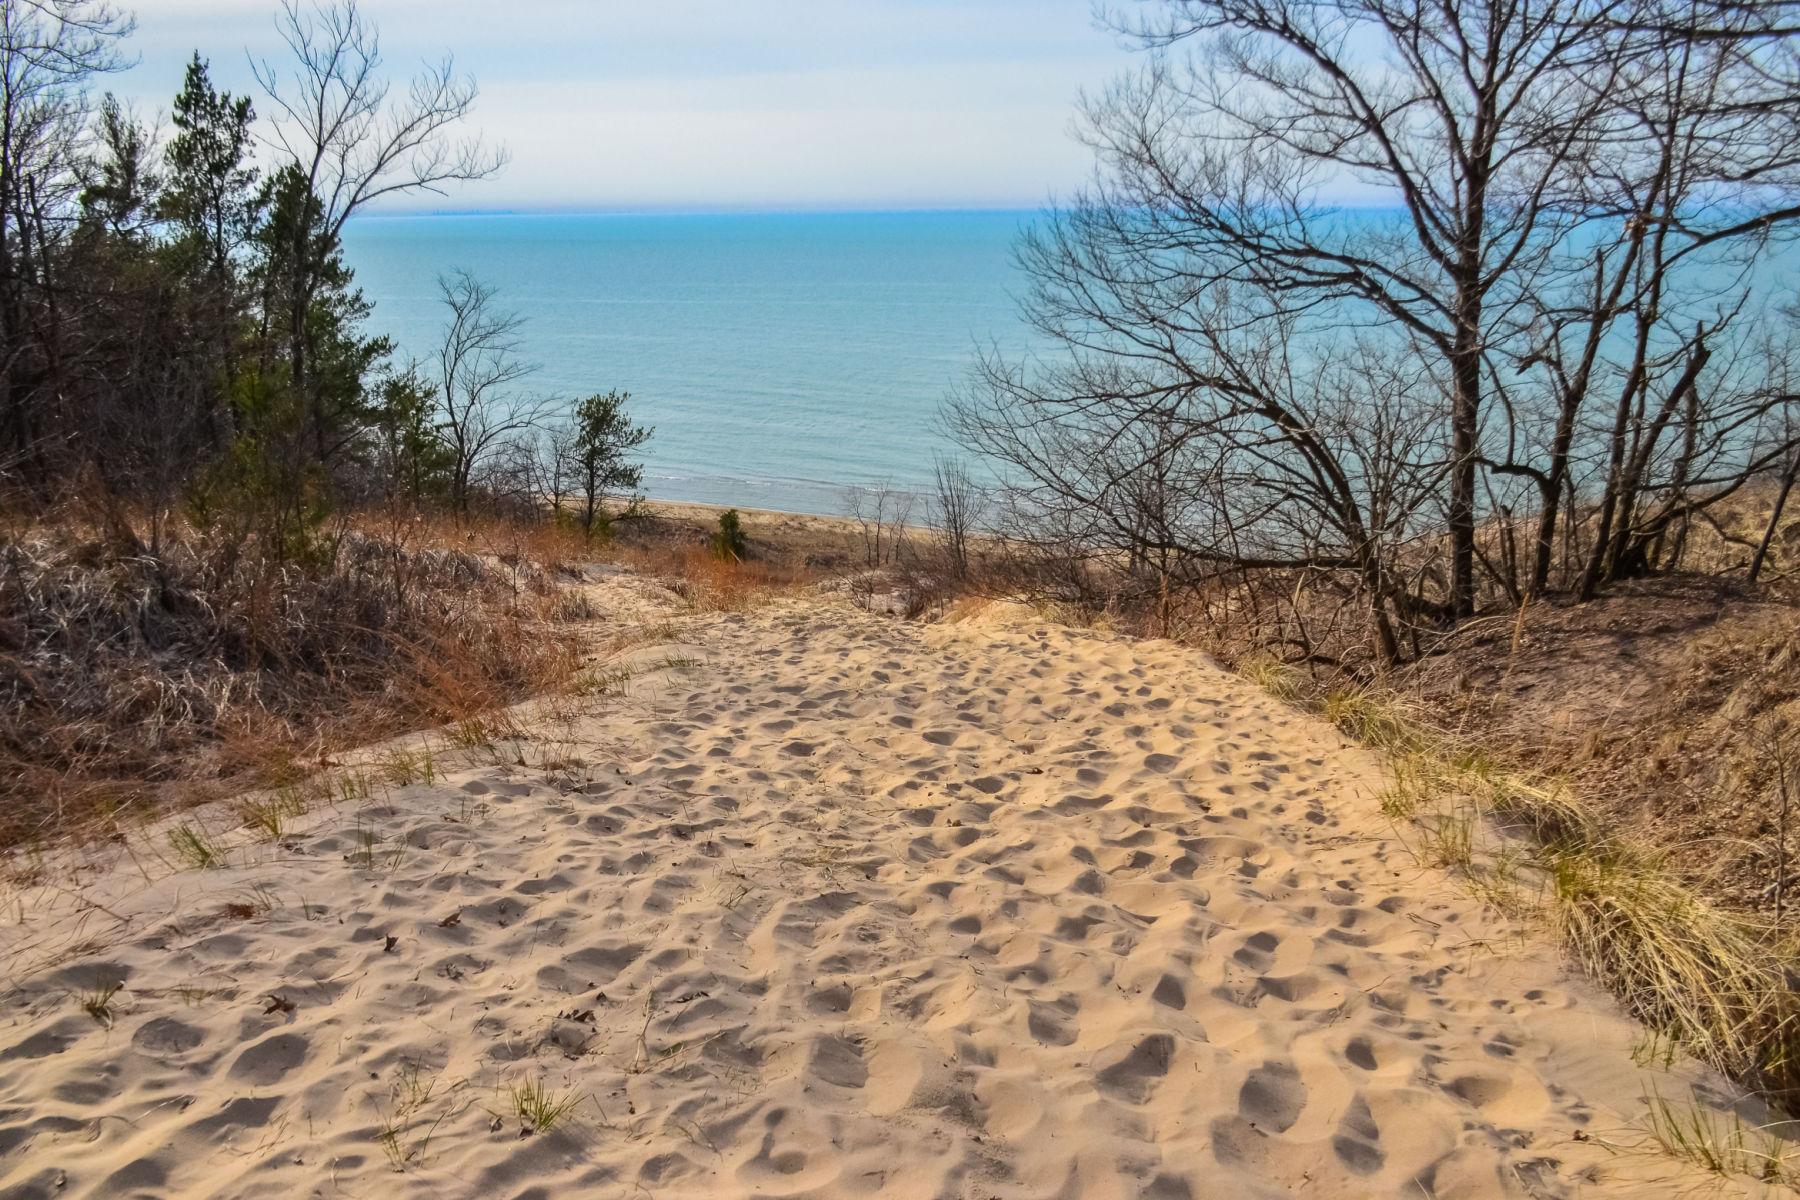 20 FUN Indiana Dunes Things to Do (+ Camping at the Dunes)